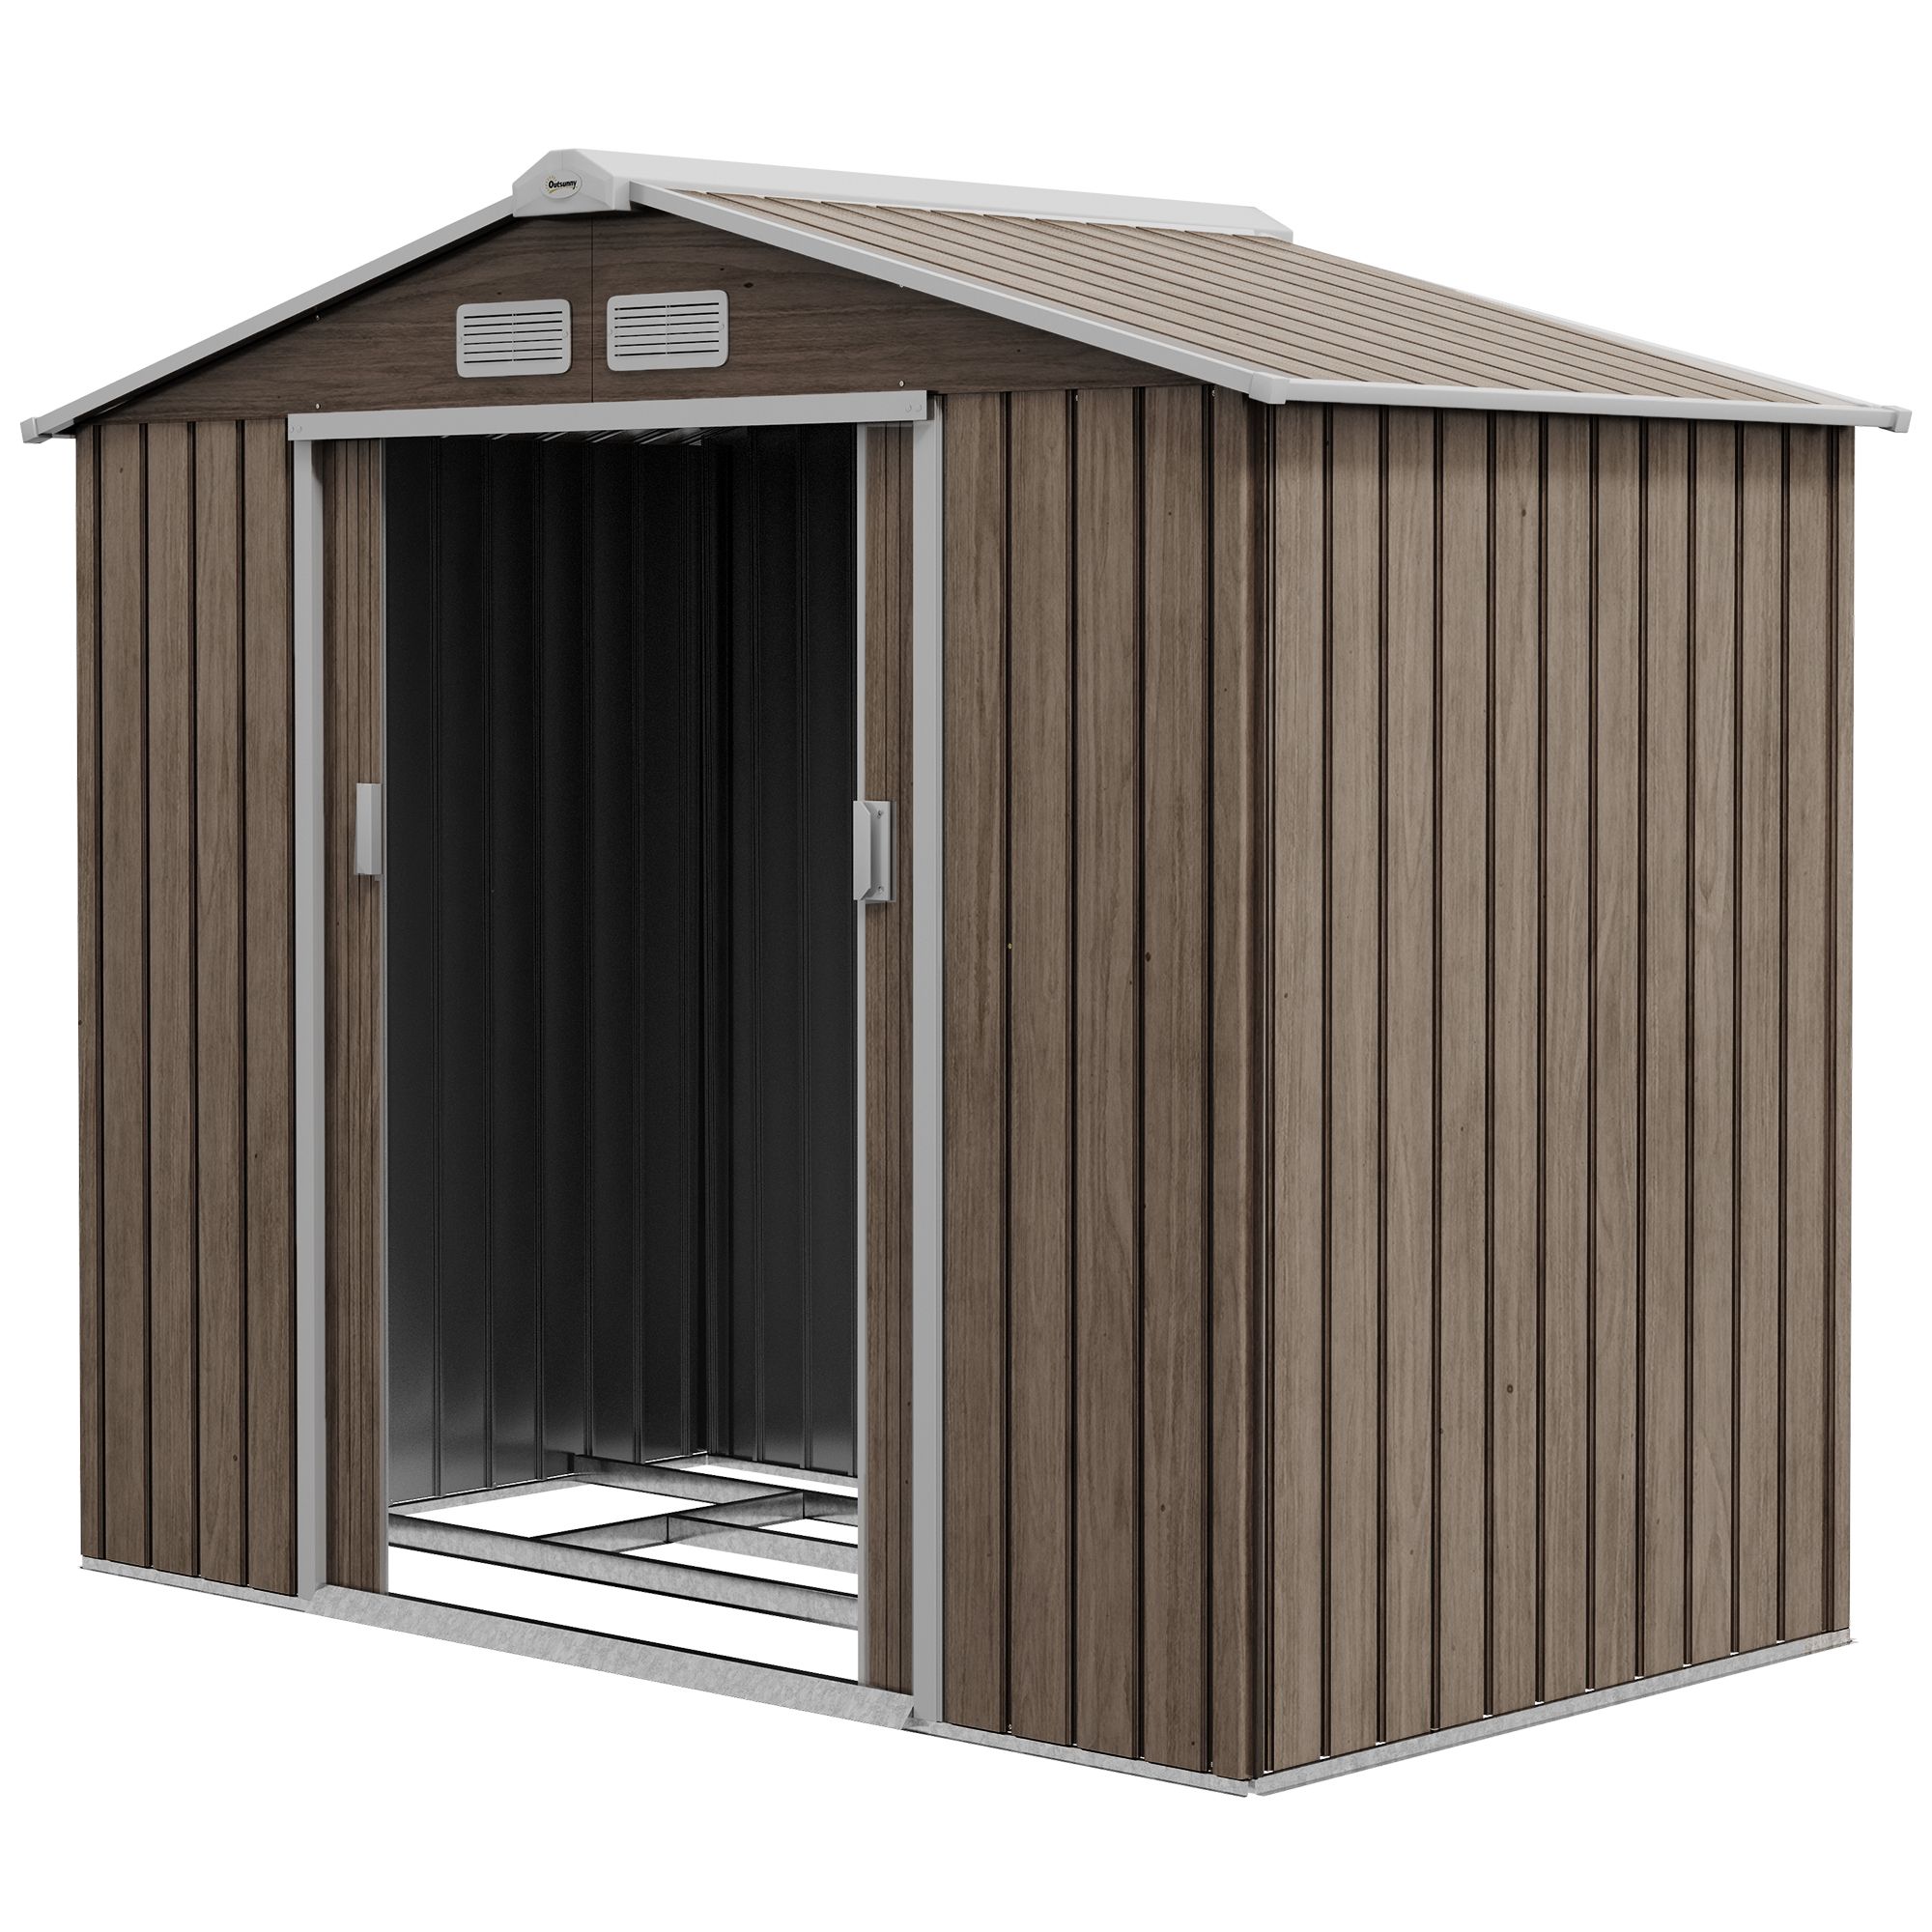 Outsunny 7 X 4ft Metal Garden Storage Shed With Vents, Floor Foundation And Lockable Double Doors, Grey